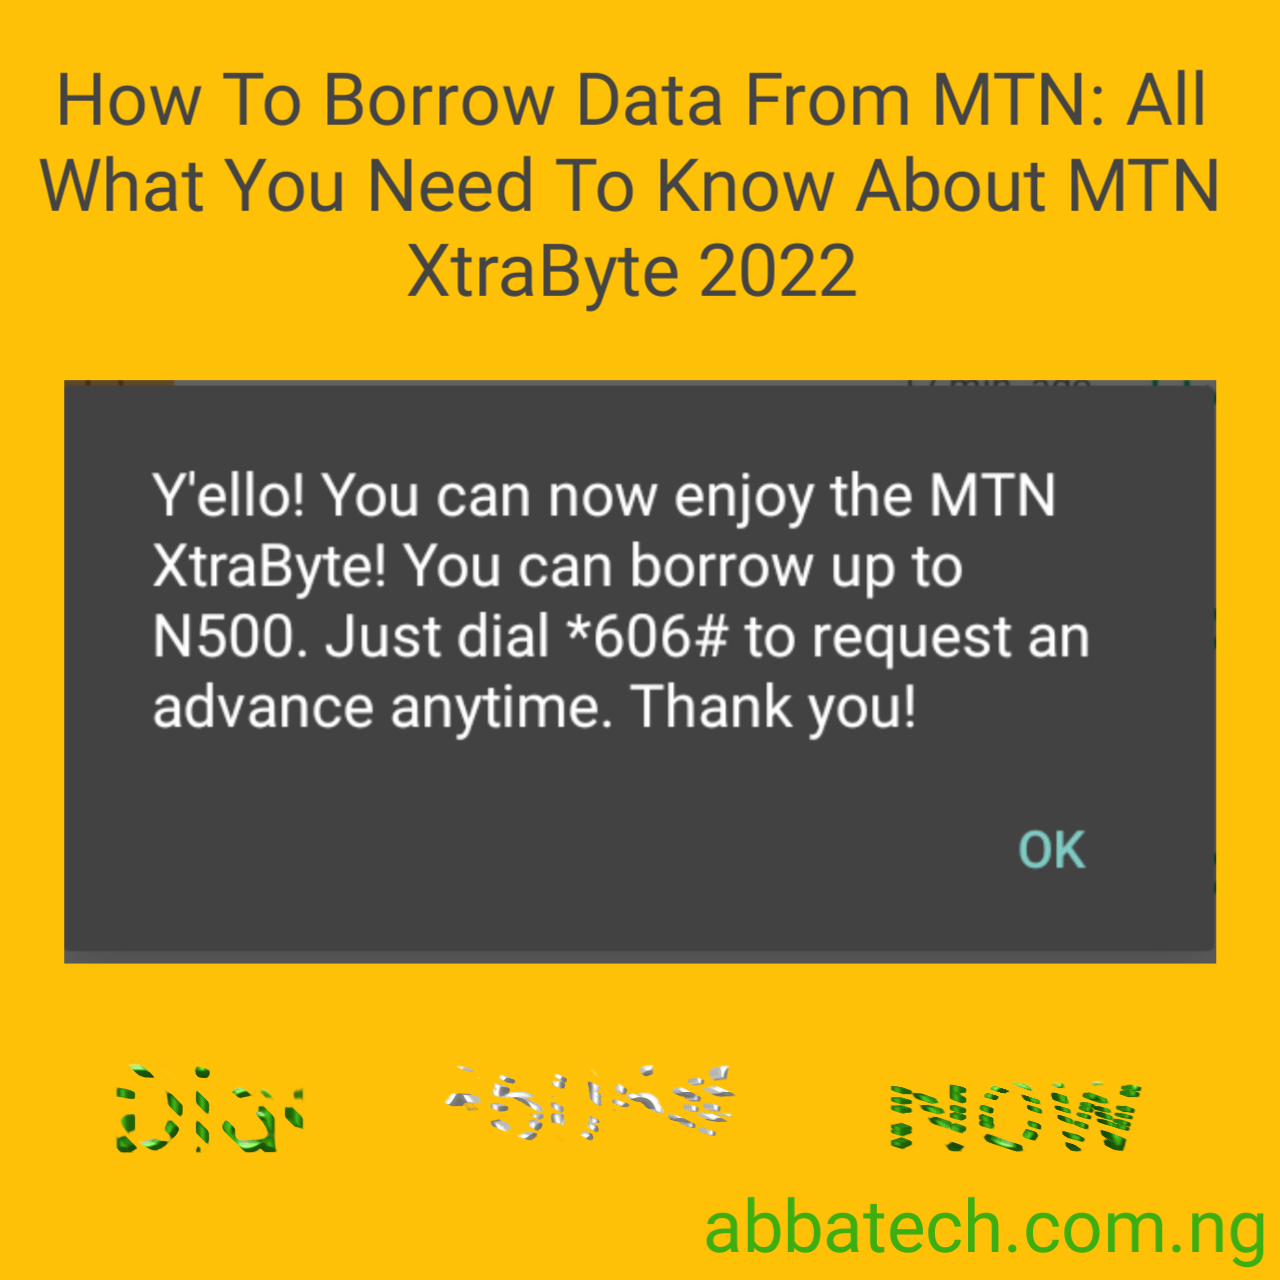 How To Borrow Data From MTN: All What You Need To Know About MTN XtraByte 2022